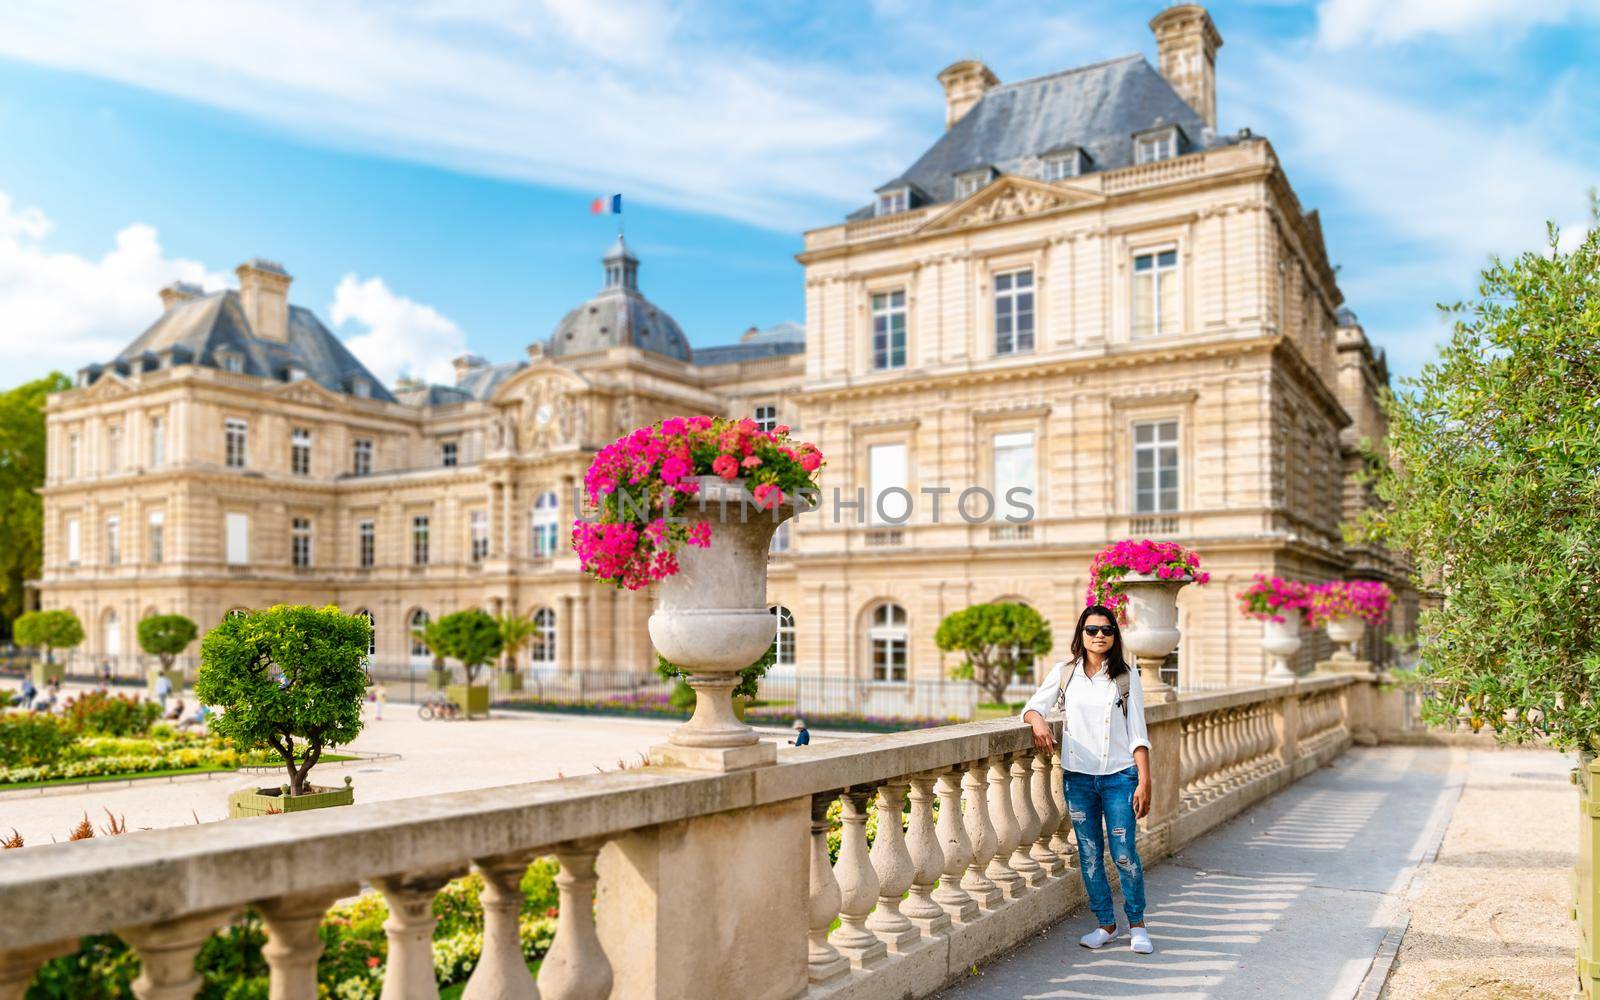 Asian women visit Le Jardin Luxembourg park in Paris during summer, people relax in the park. Jardin du Luxembourg - Jardines de Luxemburgo - Gardens of Luxembourg